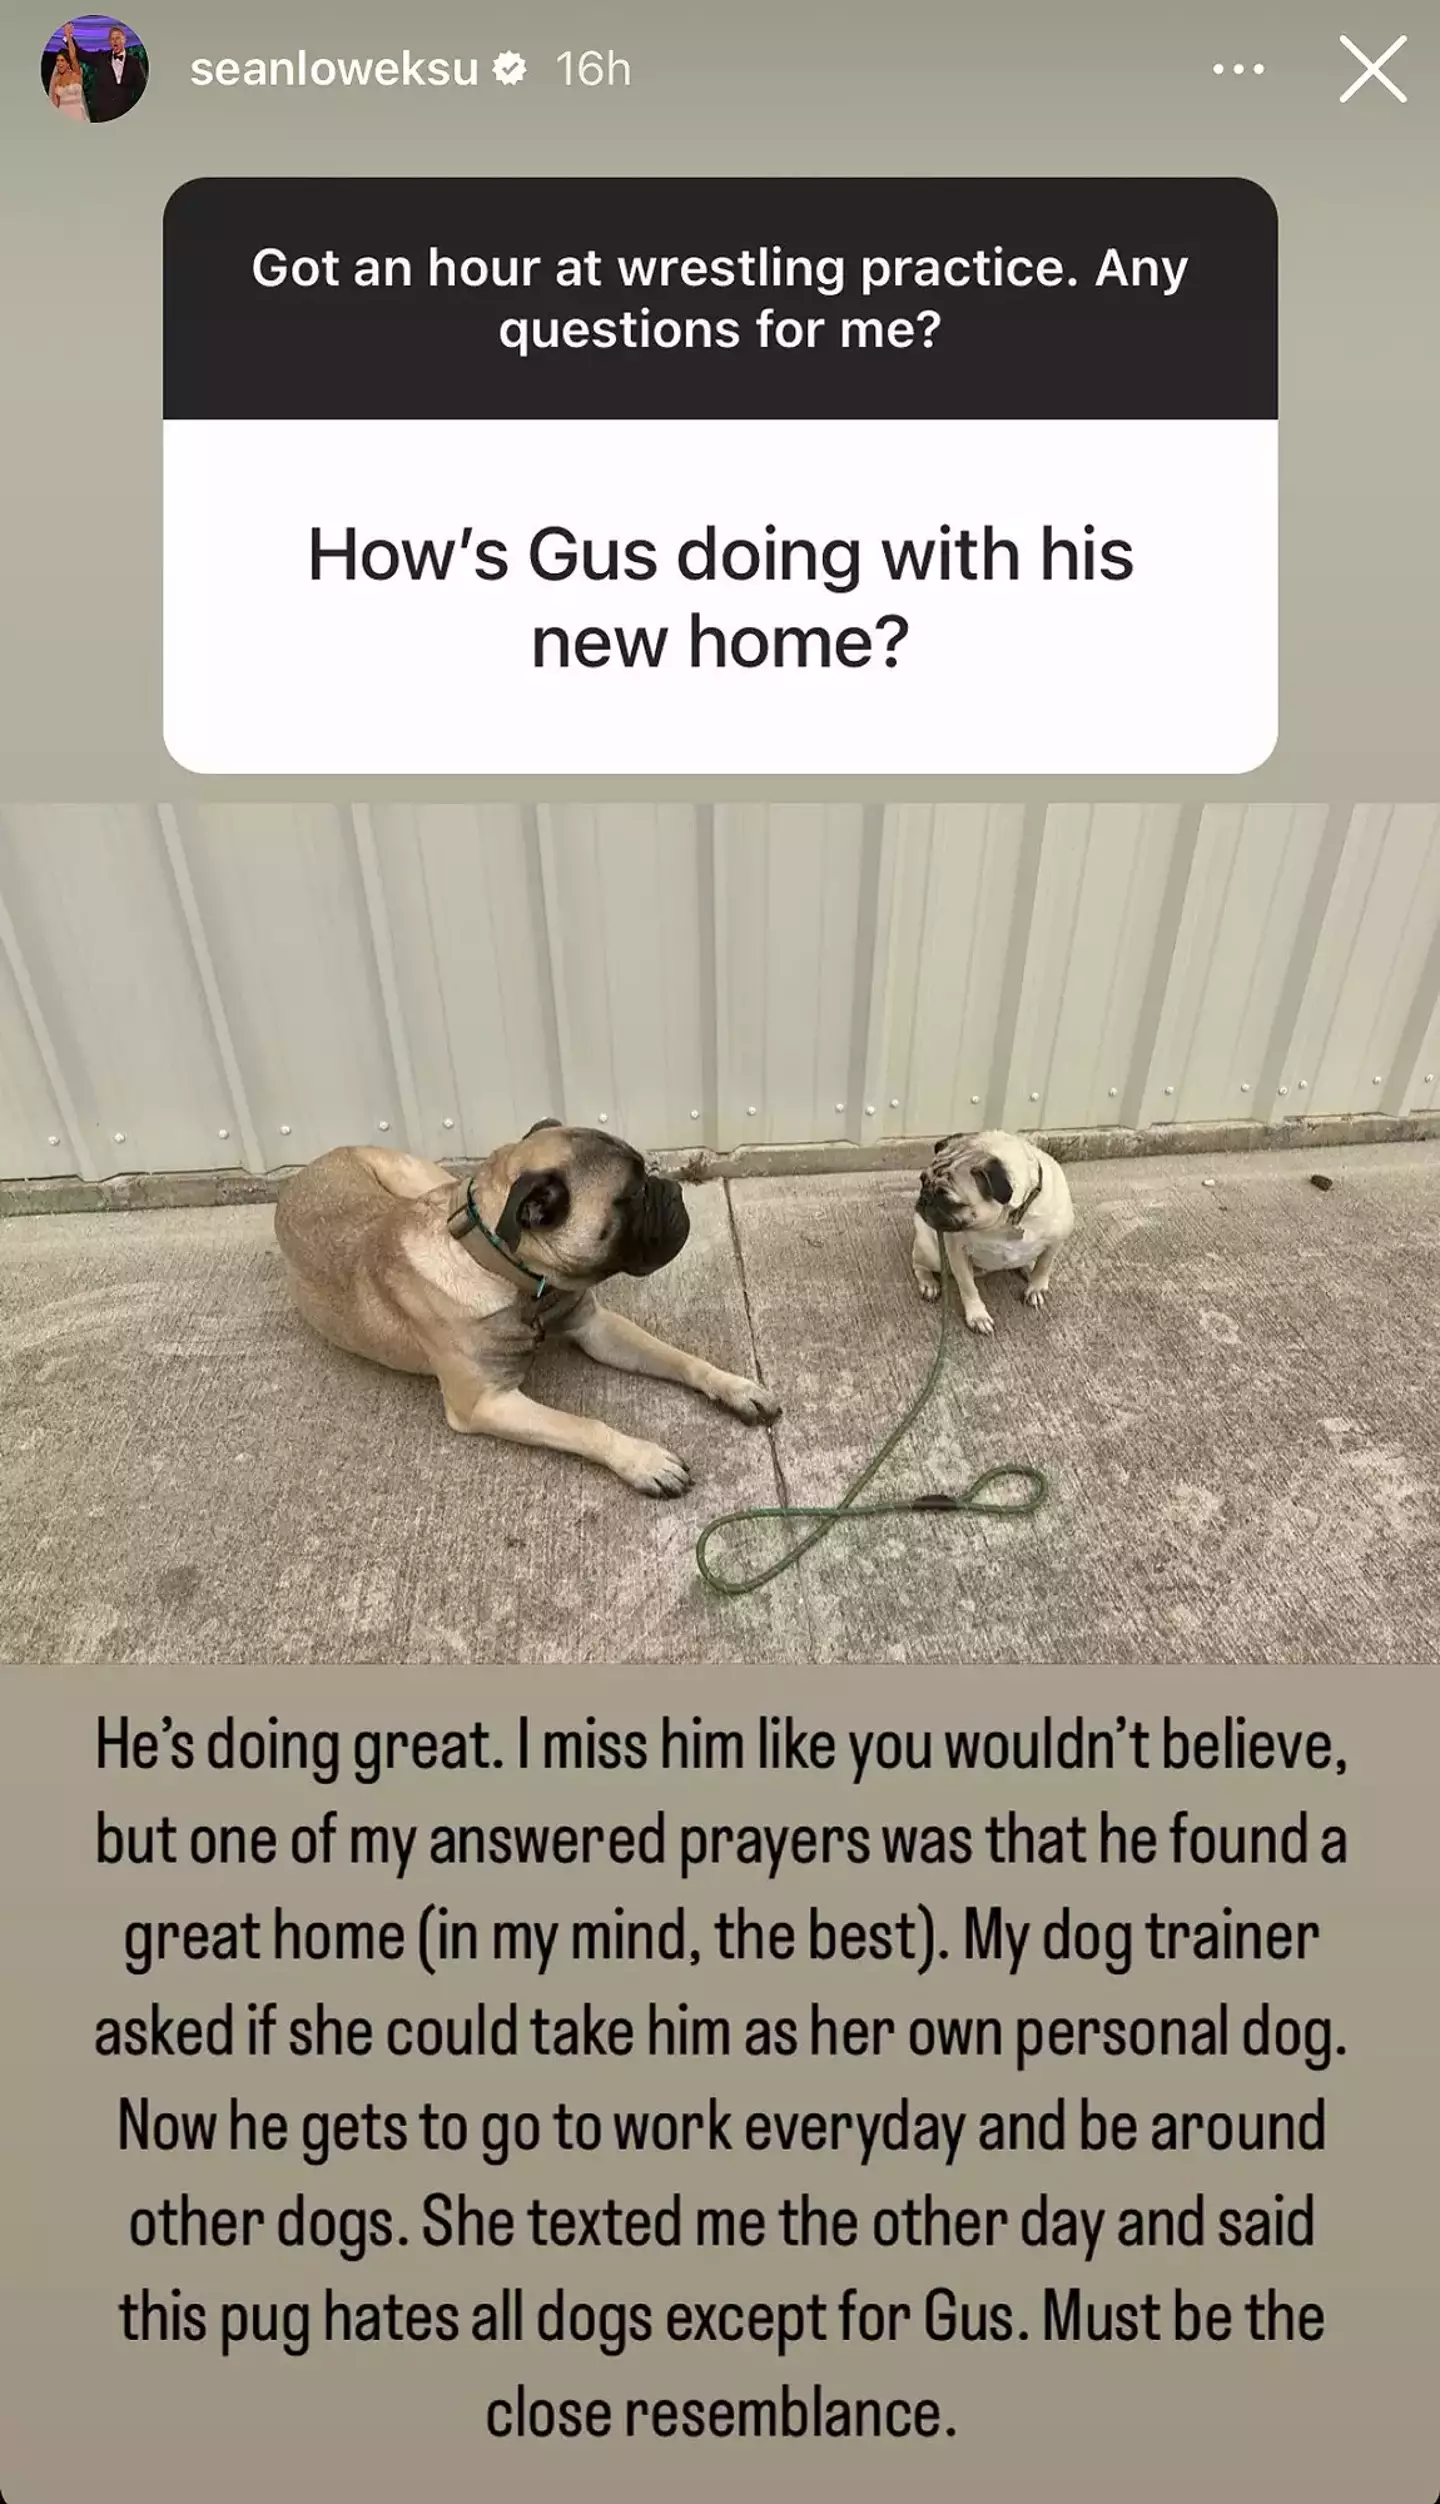 Gus the dog is doing well, too.